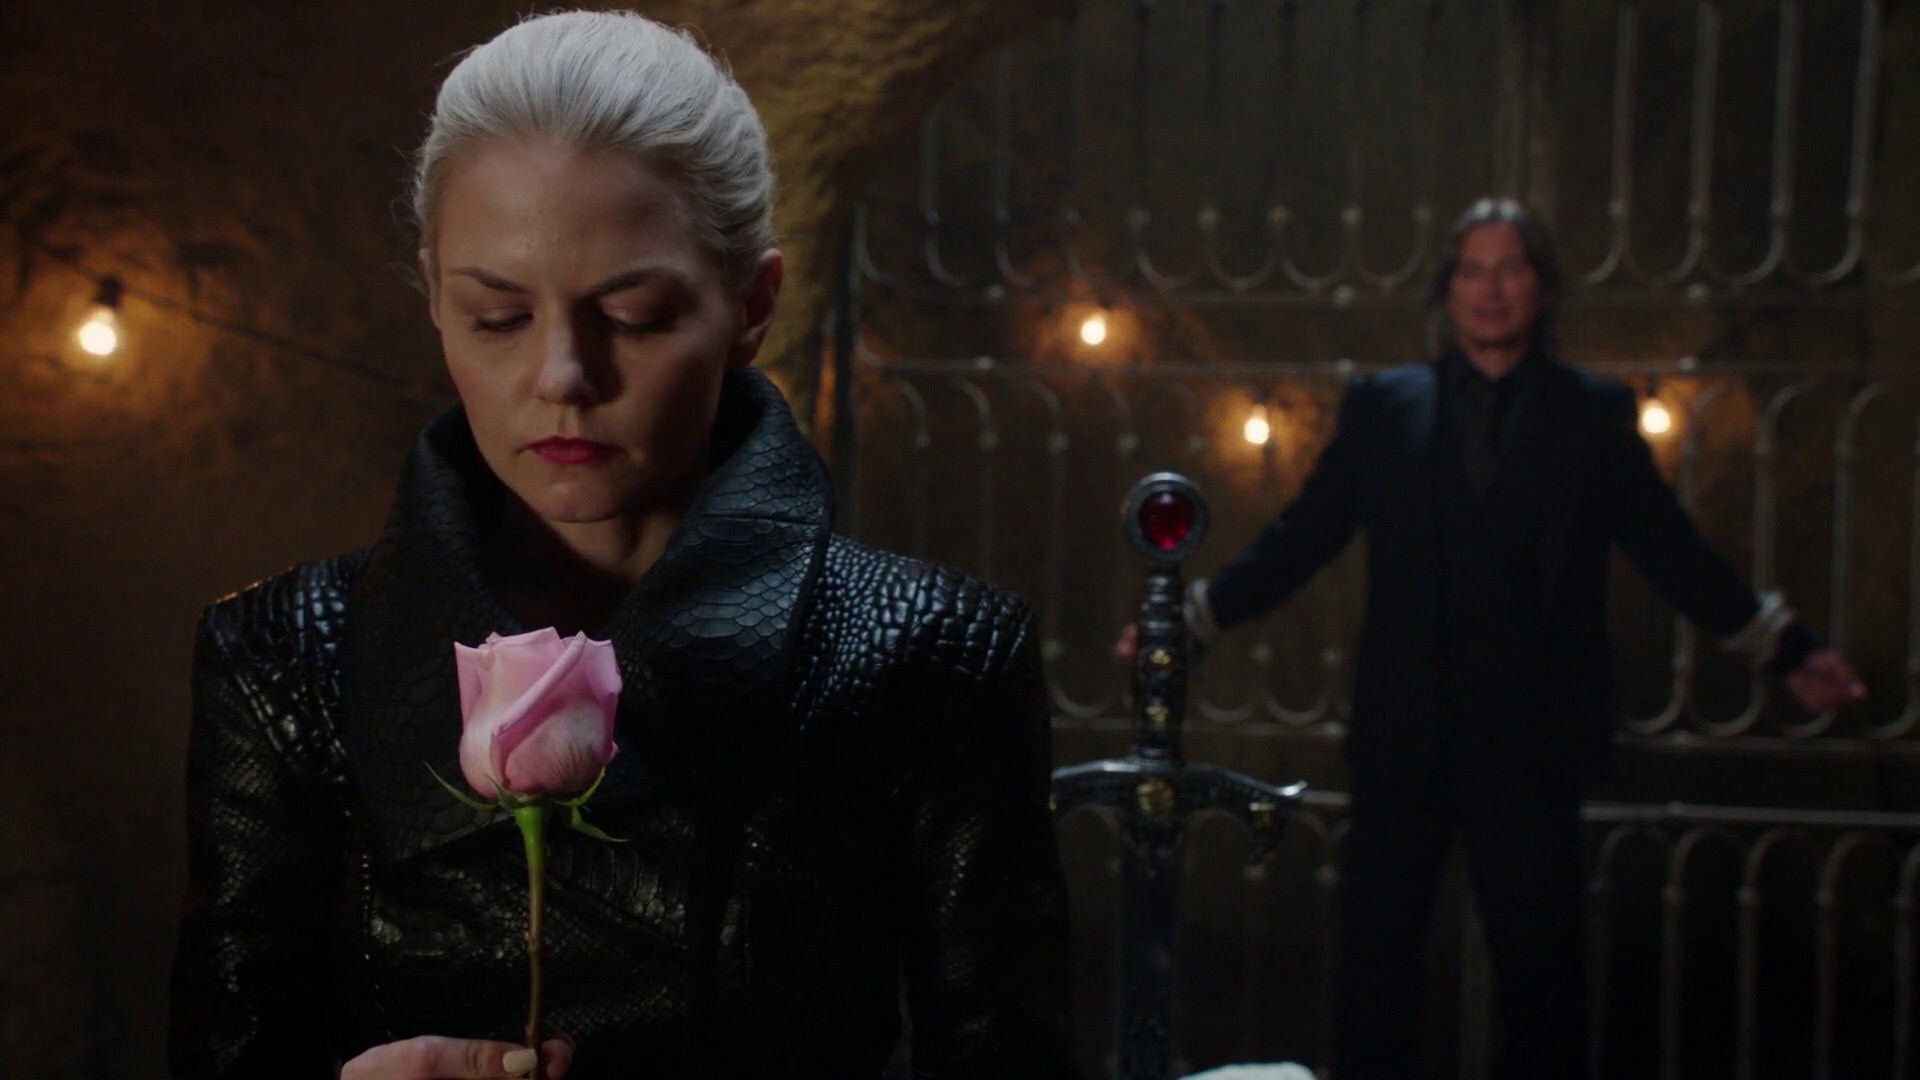 1920x1080 Once Upon a Time 5x04 The Broken Kingdom - Dark One Emma with  Rumplestiltskin